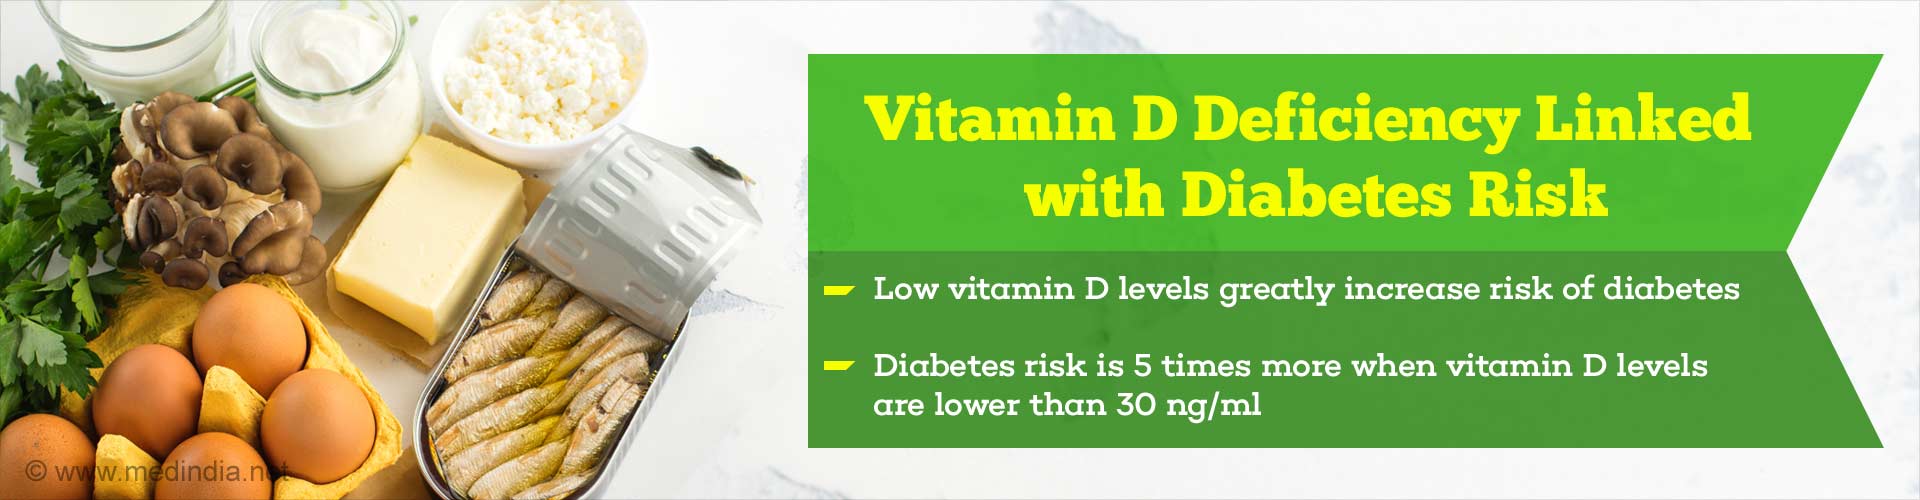 vitamin D deficiency linked with diabetes risk
- low vitamin d levels greatly increase risk of diabetes
- diabetes risk is 5 times more when vitamin d levels are lower than 30ng/ml
